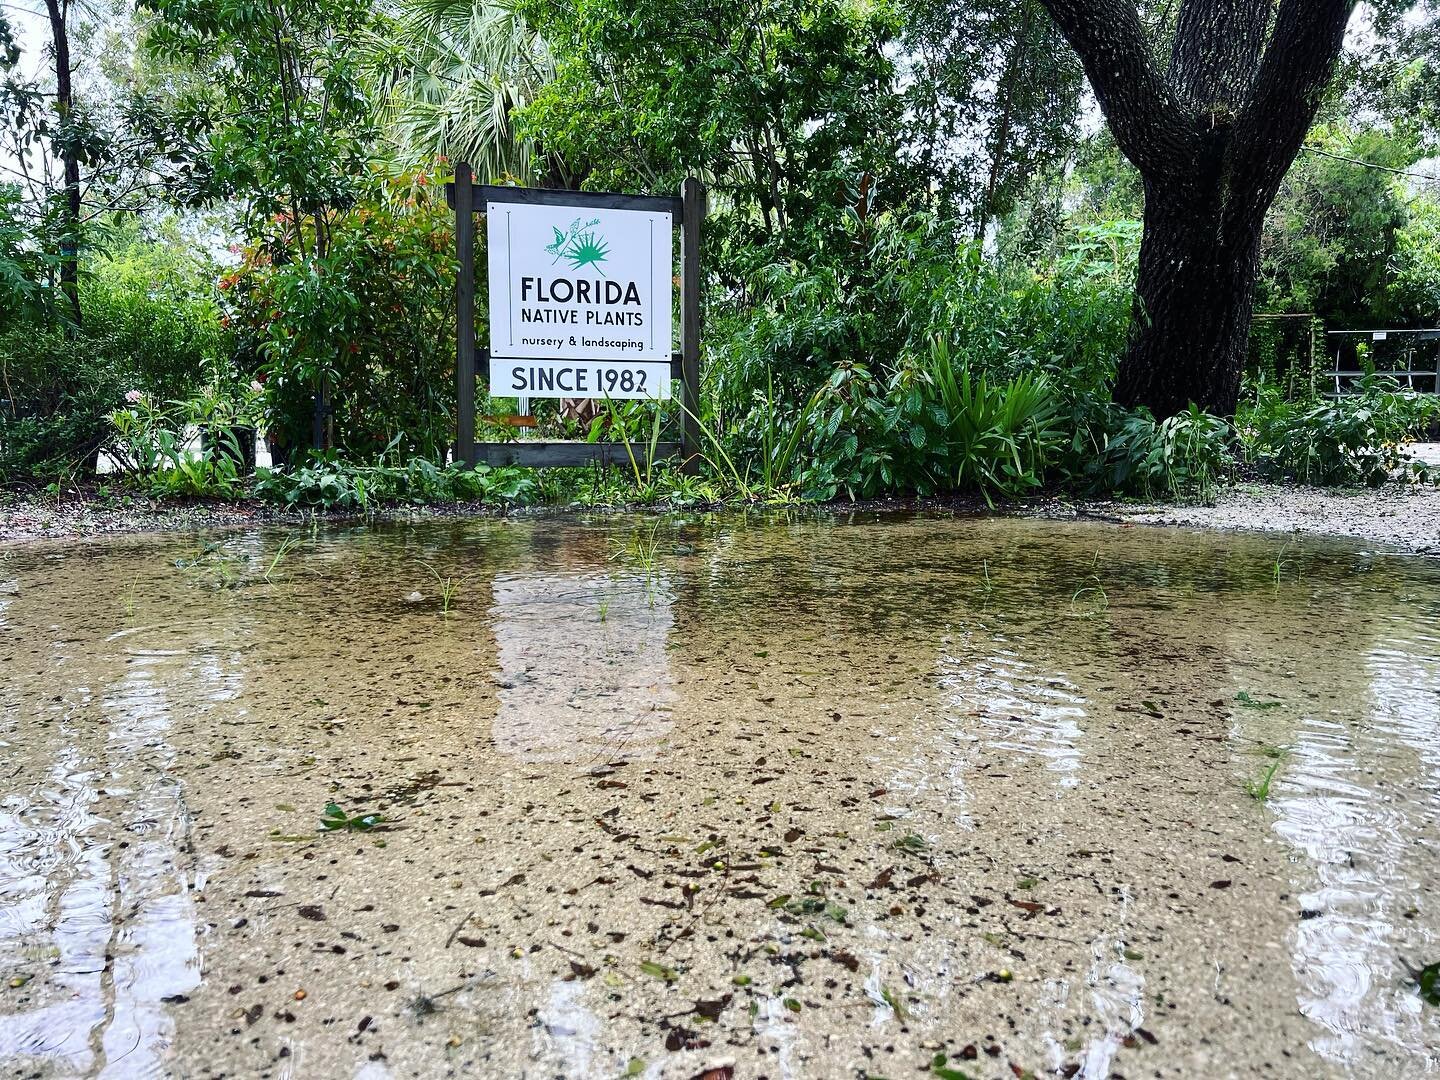 We are open our normal (summer) hours starting tomorrow 8-2 Thursday through Sunday. This lil bit of wet is pretty normal for our wetland rural nursery and will be dry by tomorrow but reflects some of the intense rain we got as the bands of hurricane